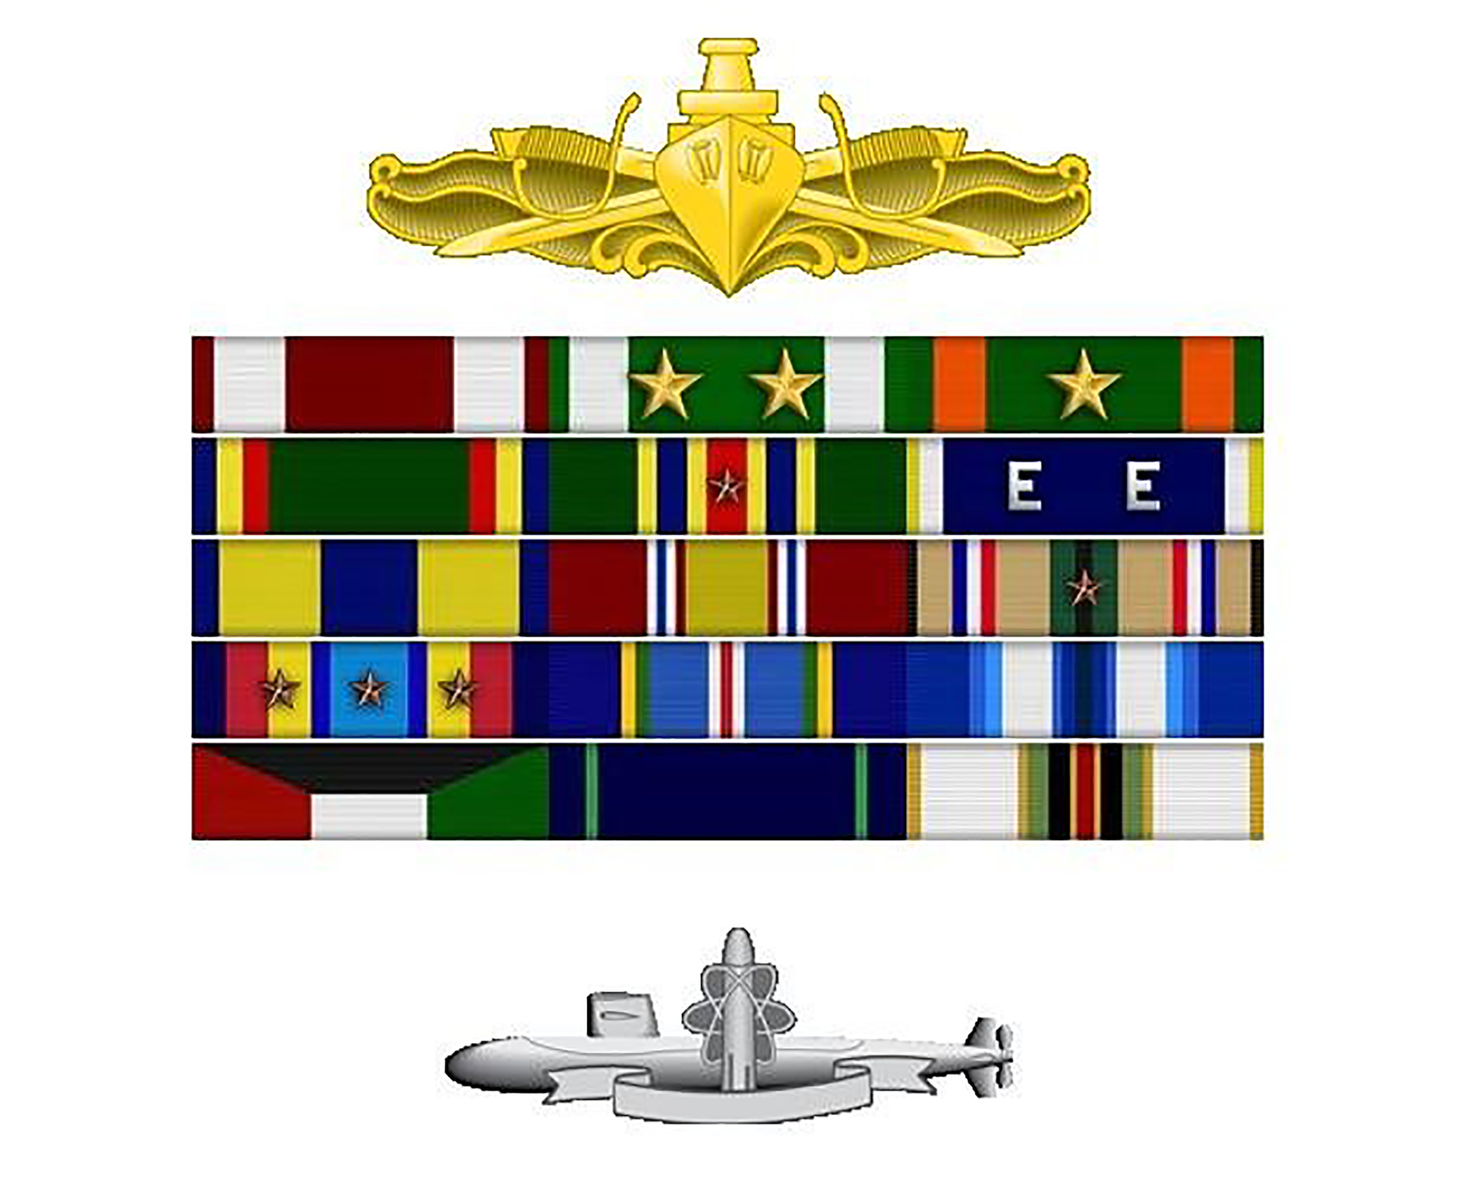 Service medals: Meritorious Service medal; Navy Commendation medal (two stars representing second, third awards); Navy Achievement medal; Navy Unit Commendation; Navy Meritorious Unit Commendation; Navy Expeditionary medal; National Defense Service Medal.